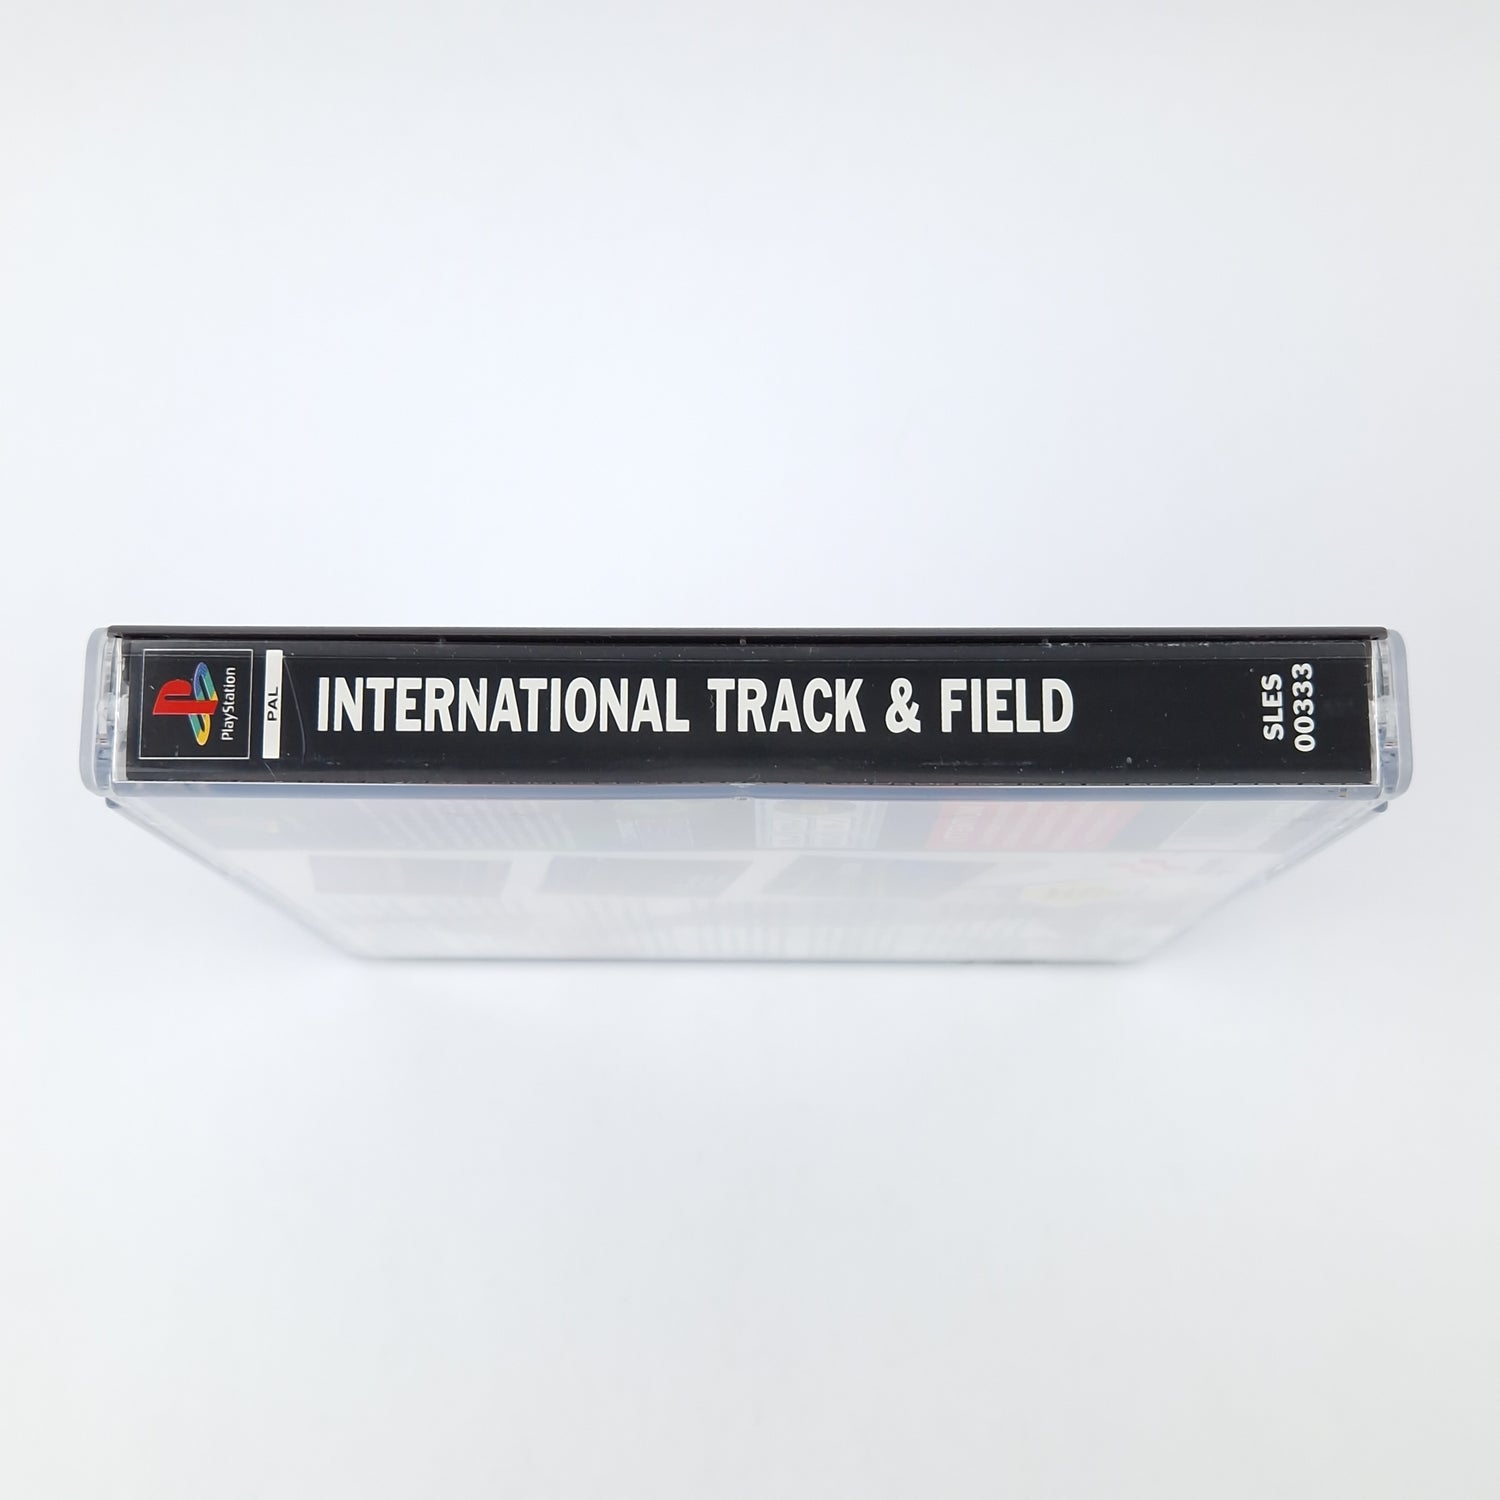 Playstation 1 Game: Track & Field International CD Instructions OVP SONY PS1 PSX